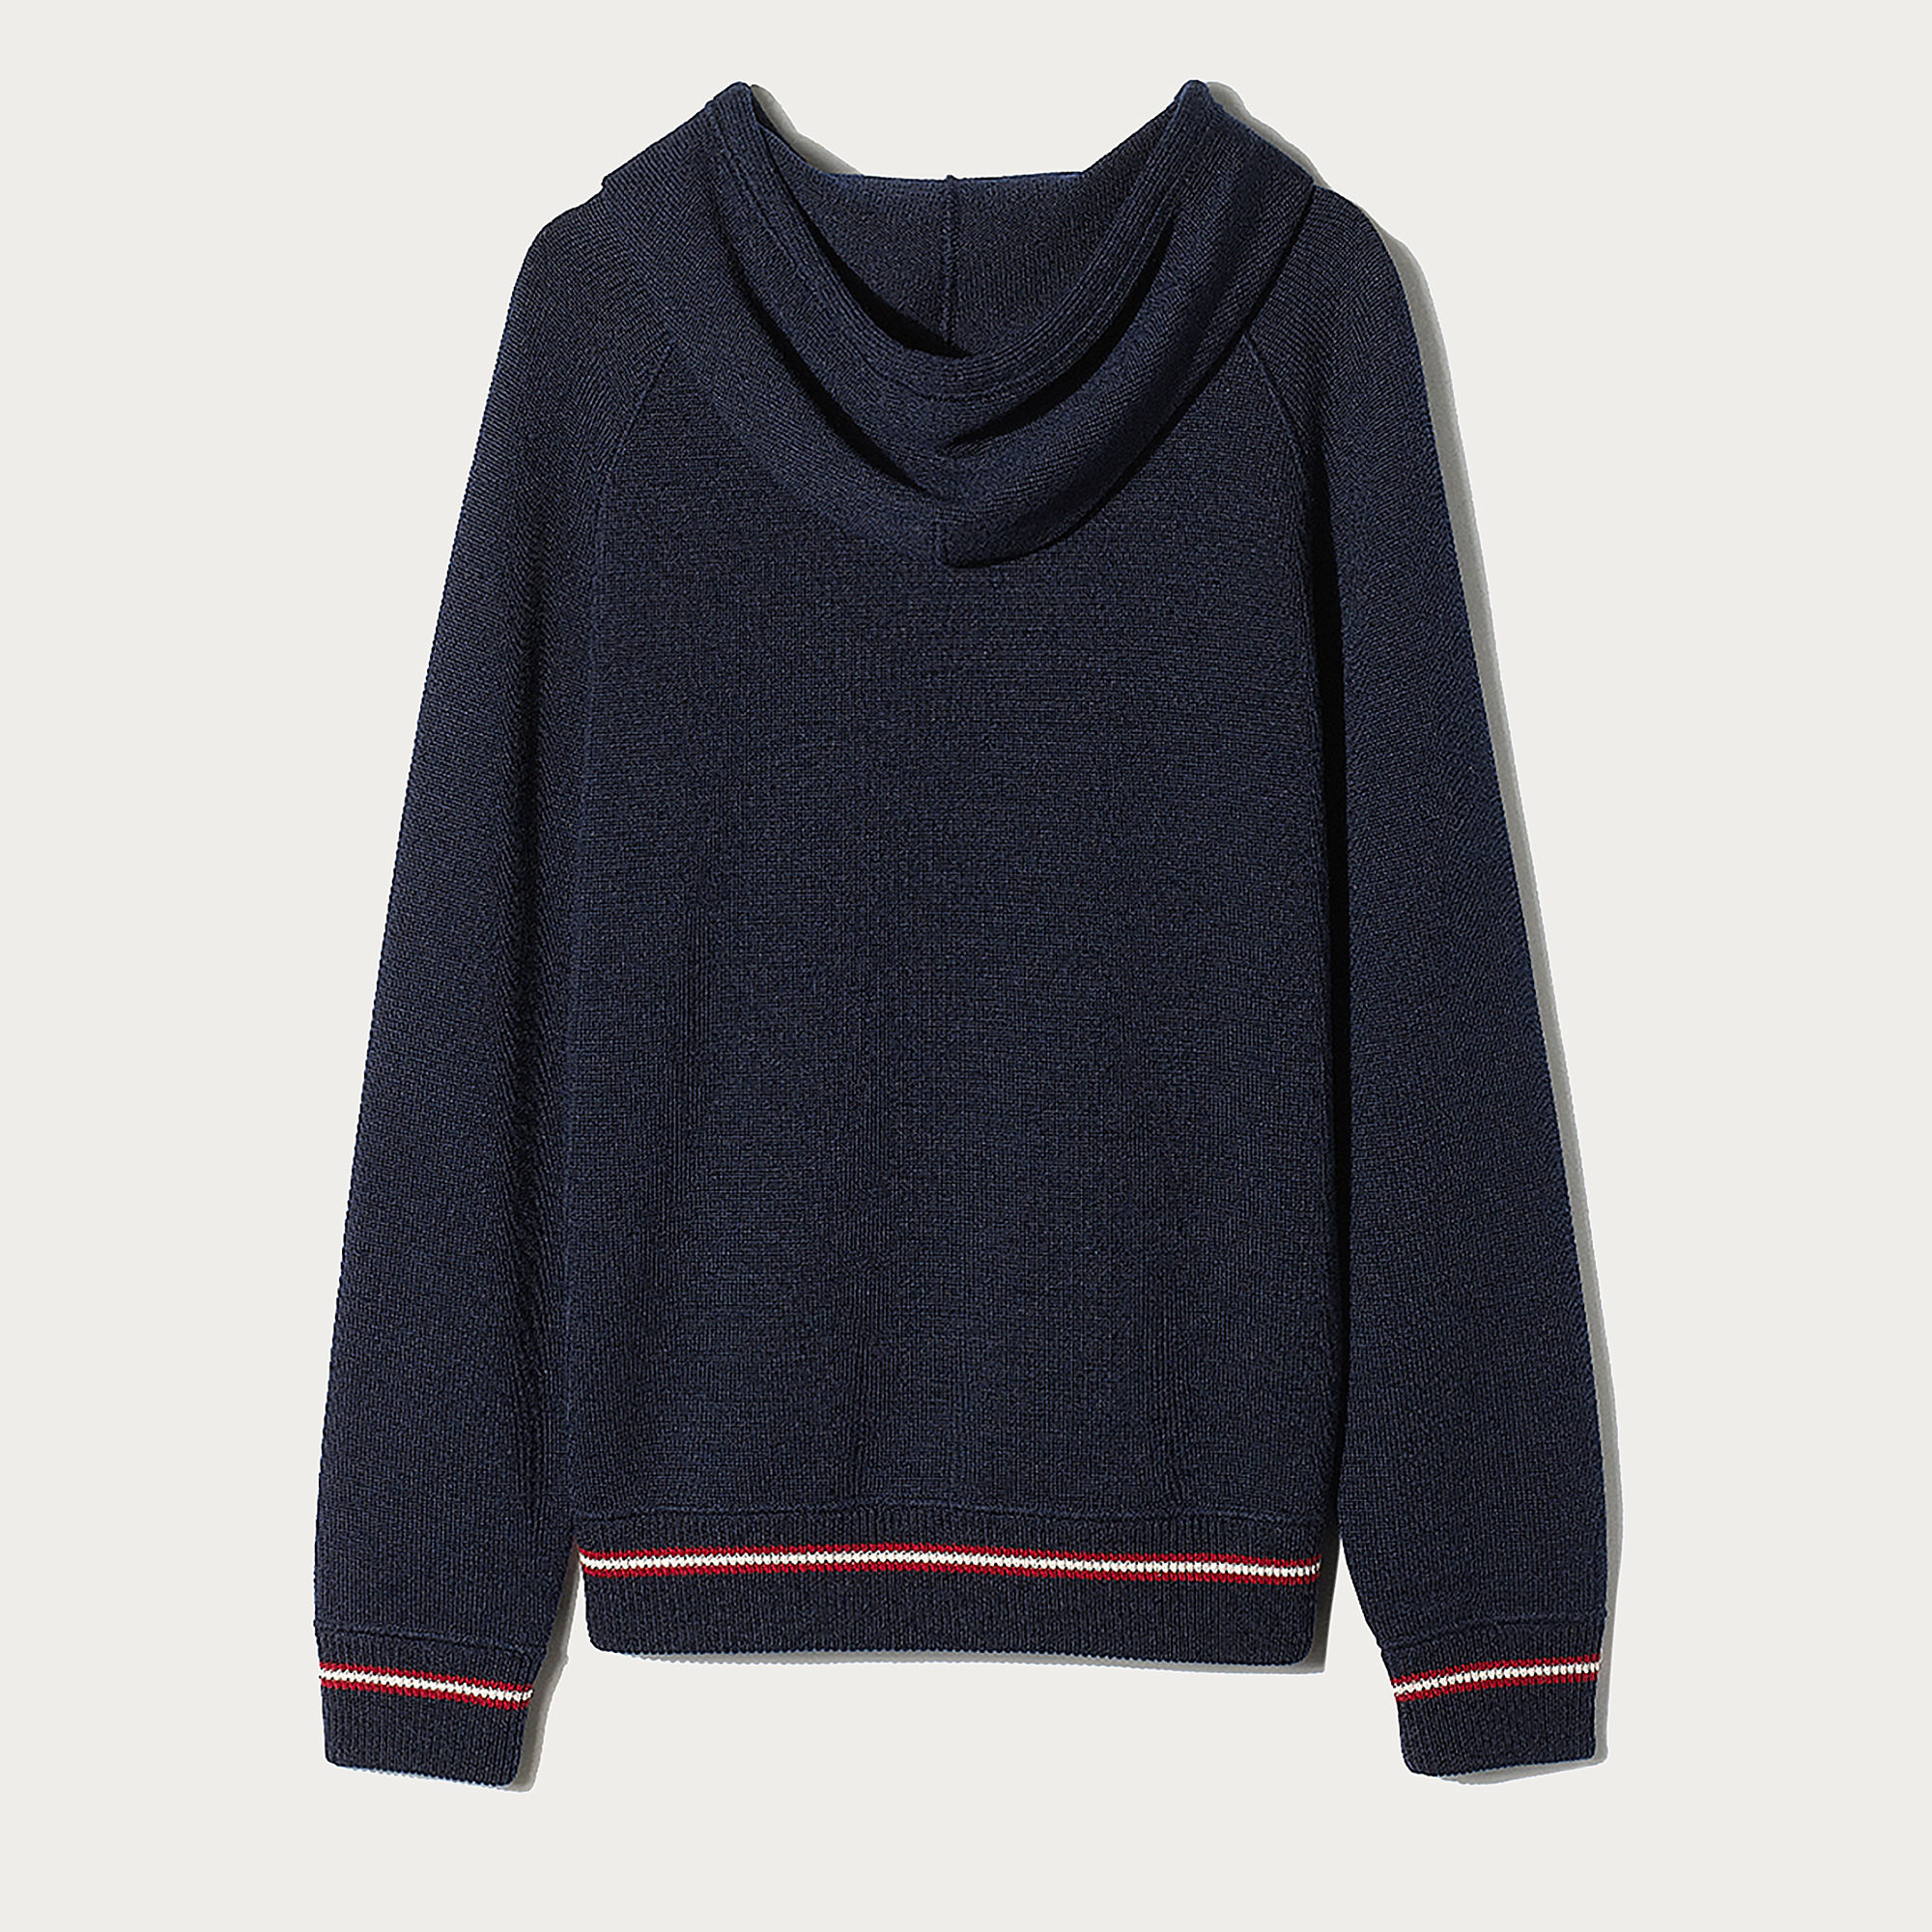 Lyst - Bally Sweater With Hood in Blue for Men